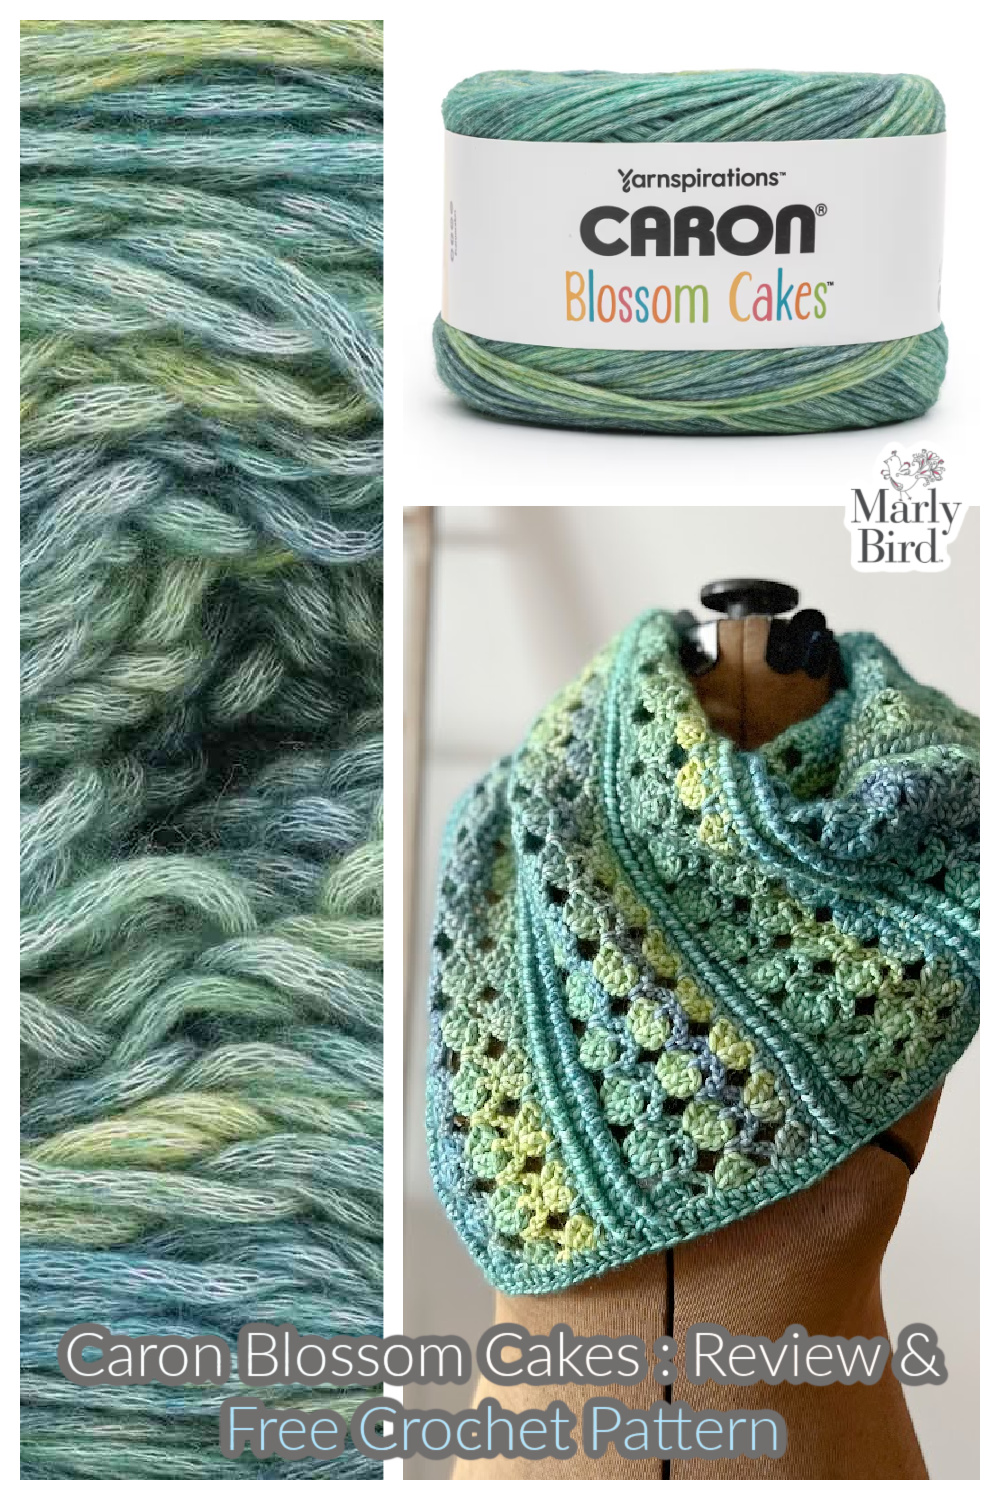 Close up of Caron Cotton Cake Yarn in green color, crochet shawl sample shown on a mannequin, image of a ball of caron cake yarn - Marly Bird logo